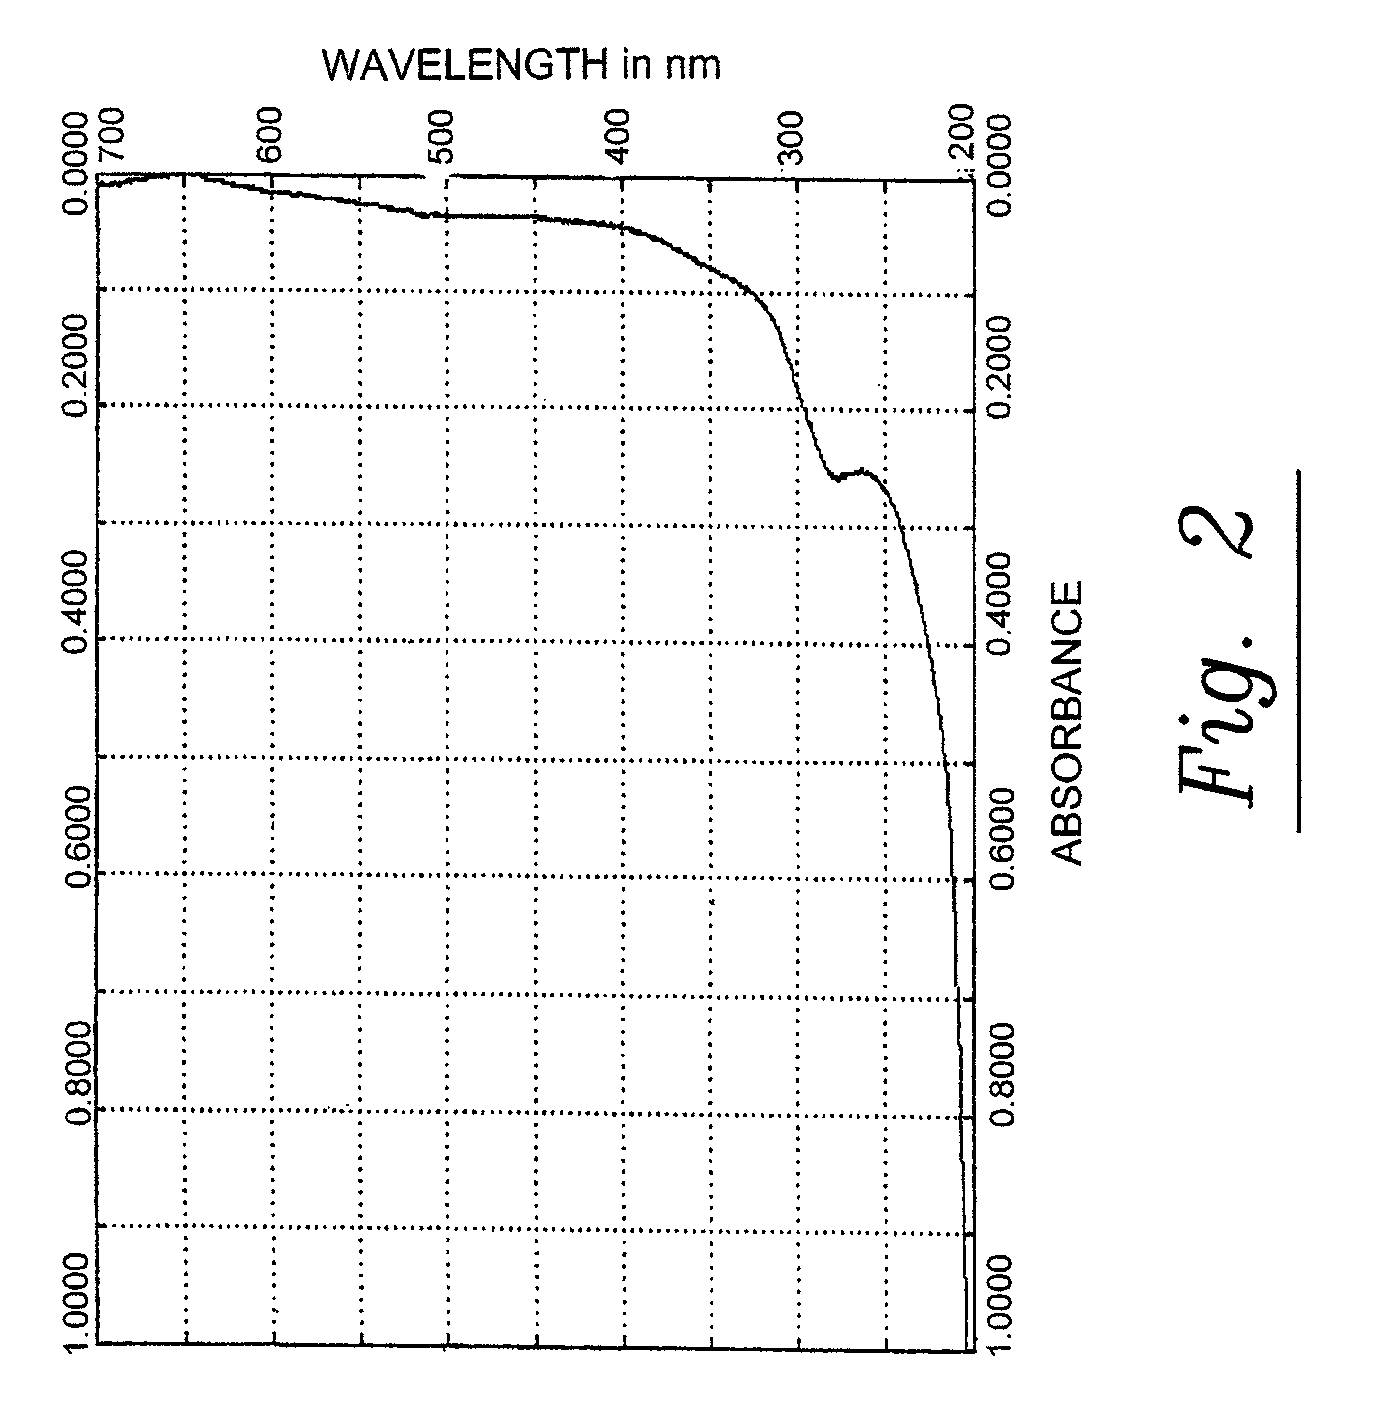 Plant extracts and uses thereof